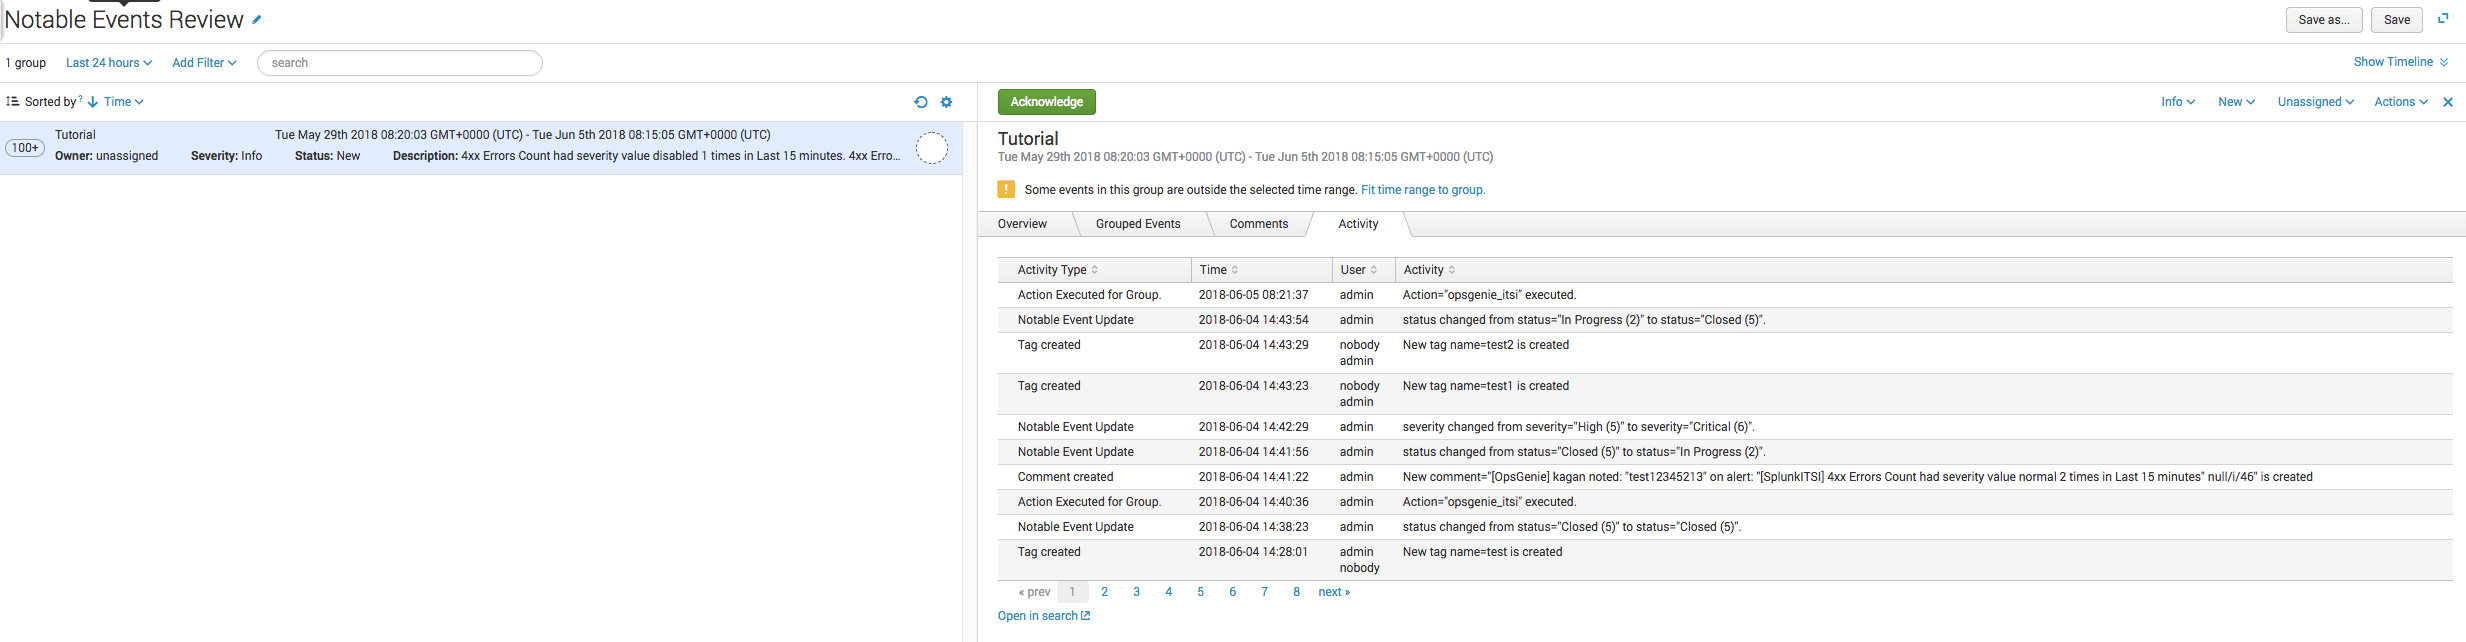 Splunk ITSI Notable Events Review